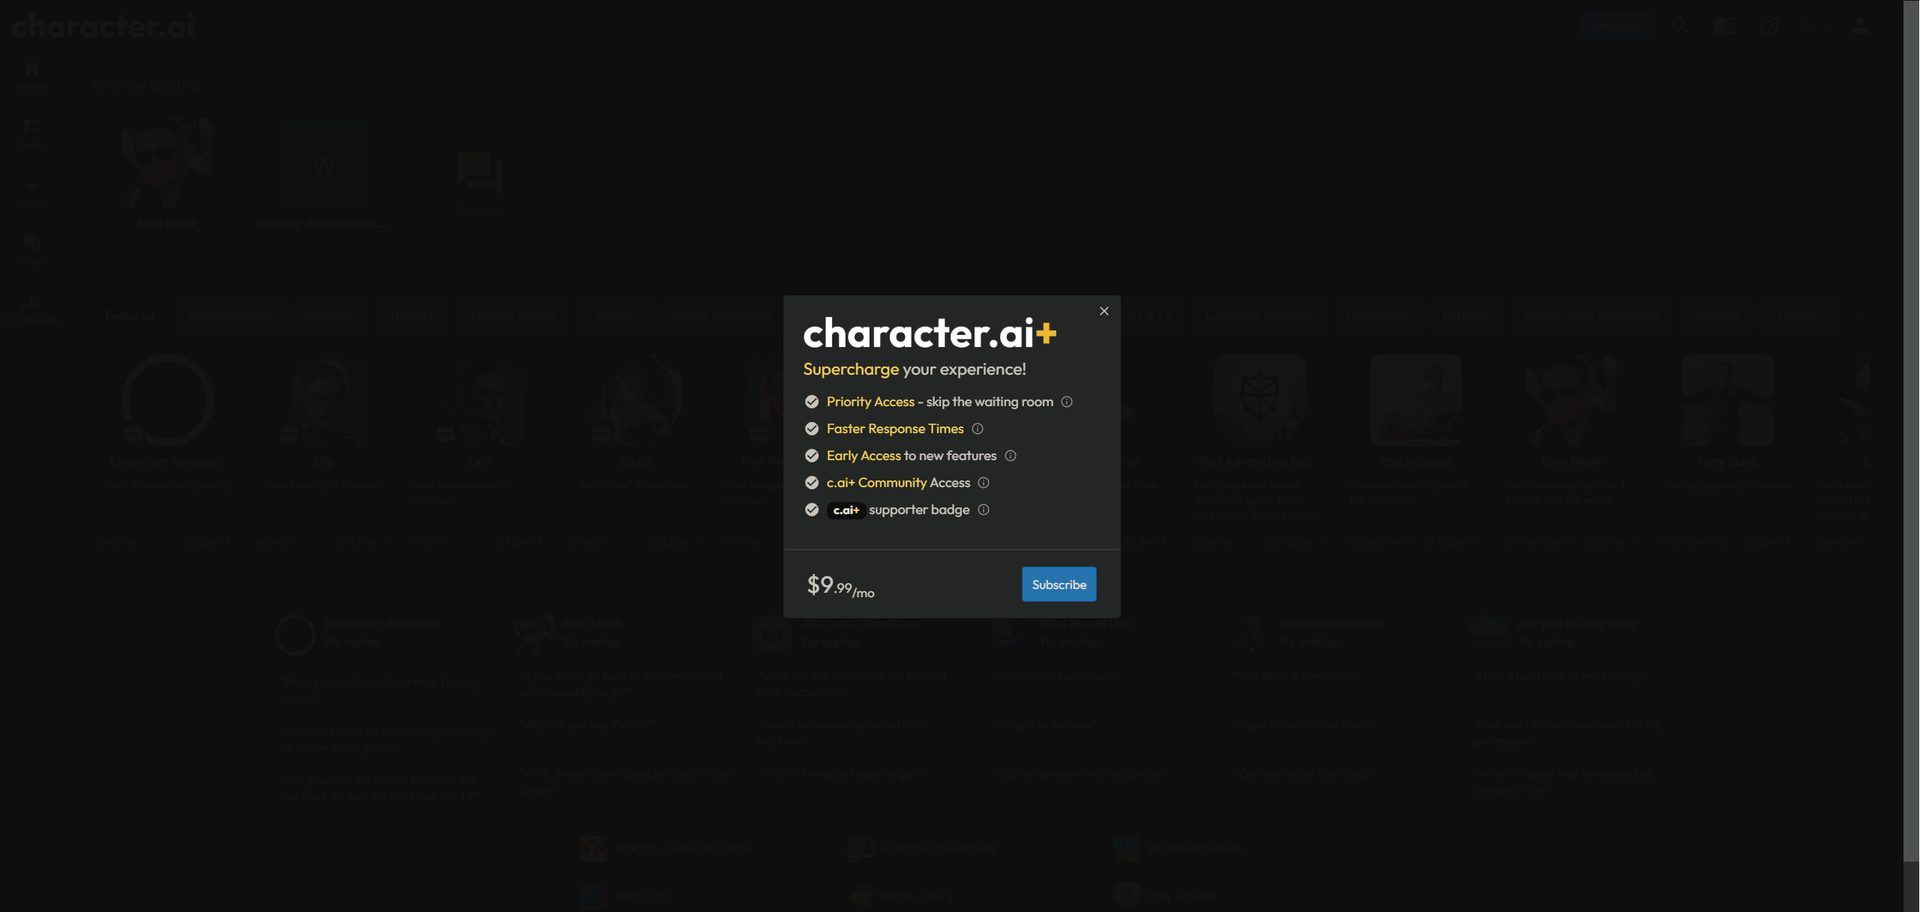 What is Character.ai? Learn its new paid tier Character AI Plus and Character AI voices. Keep reading and explore how to download Character AI!